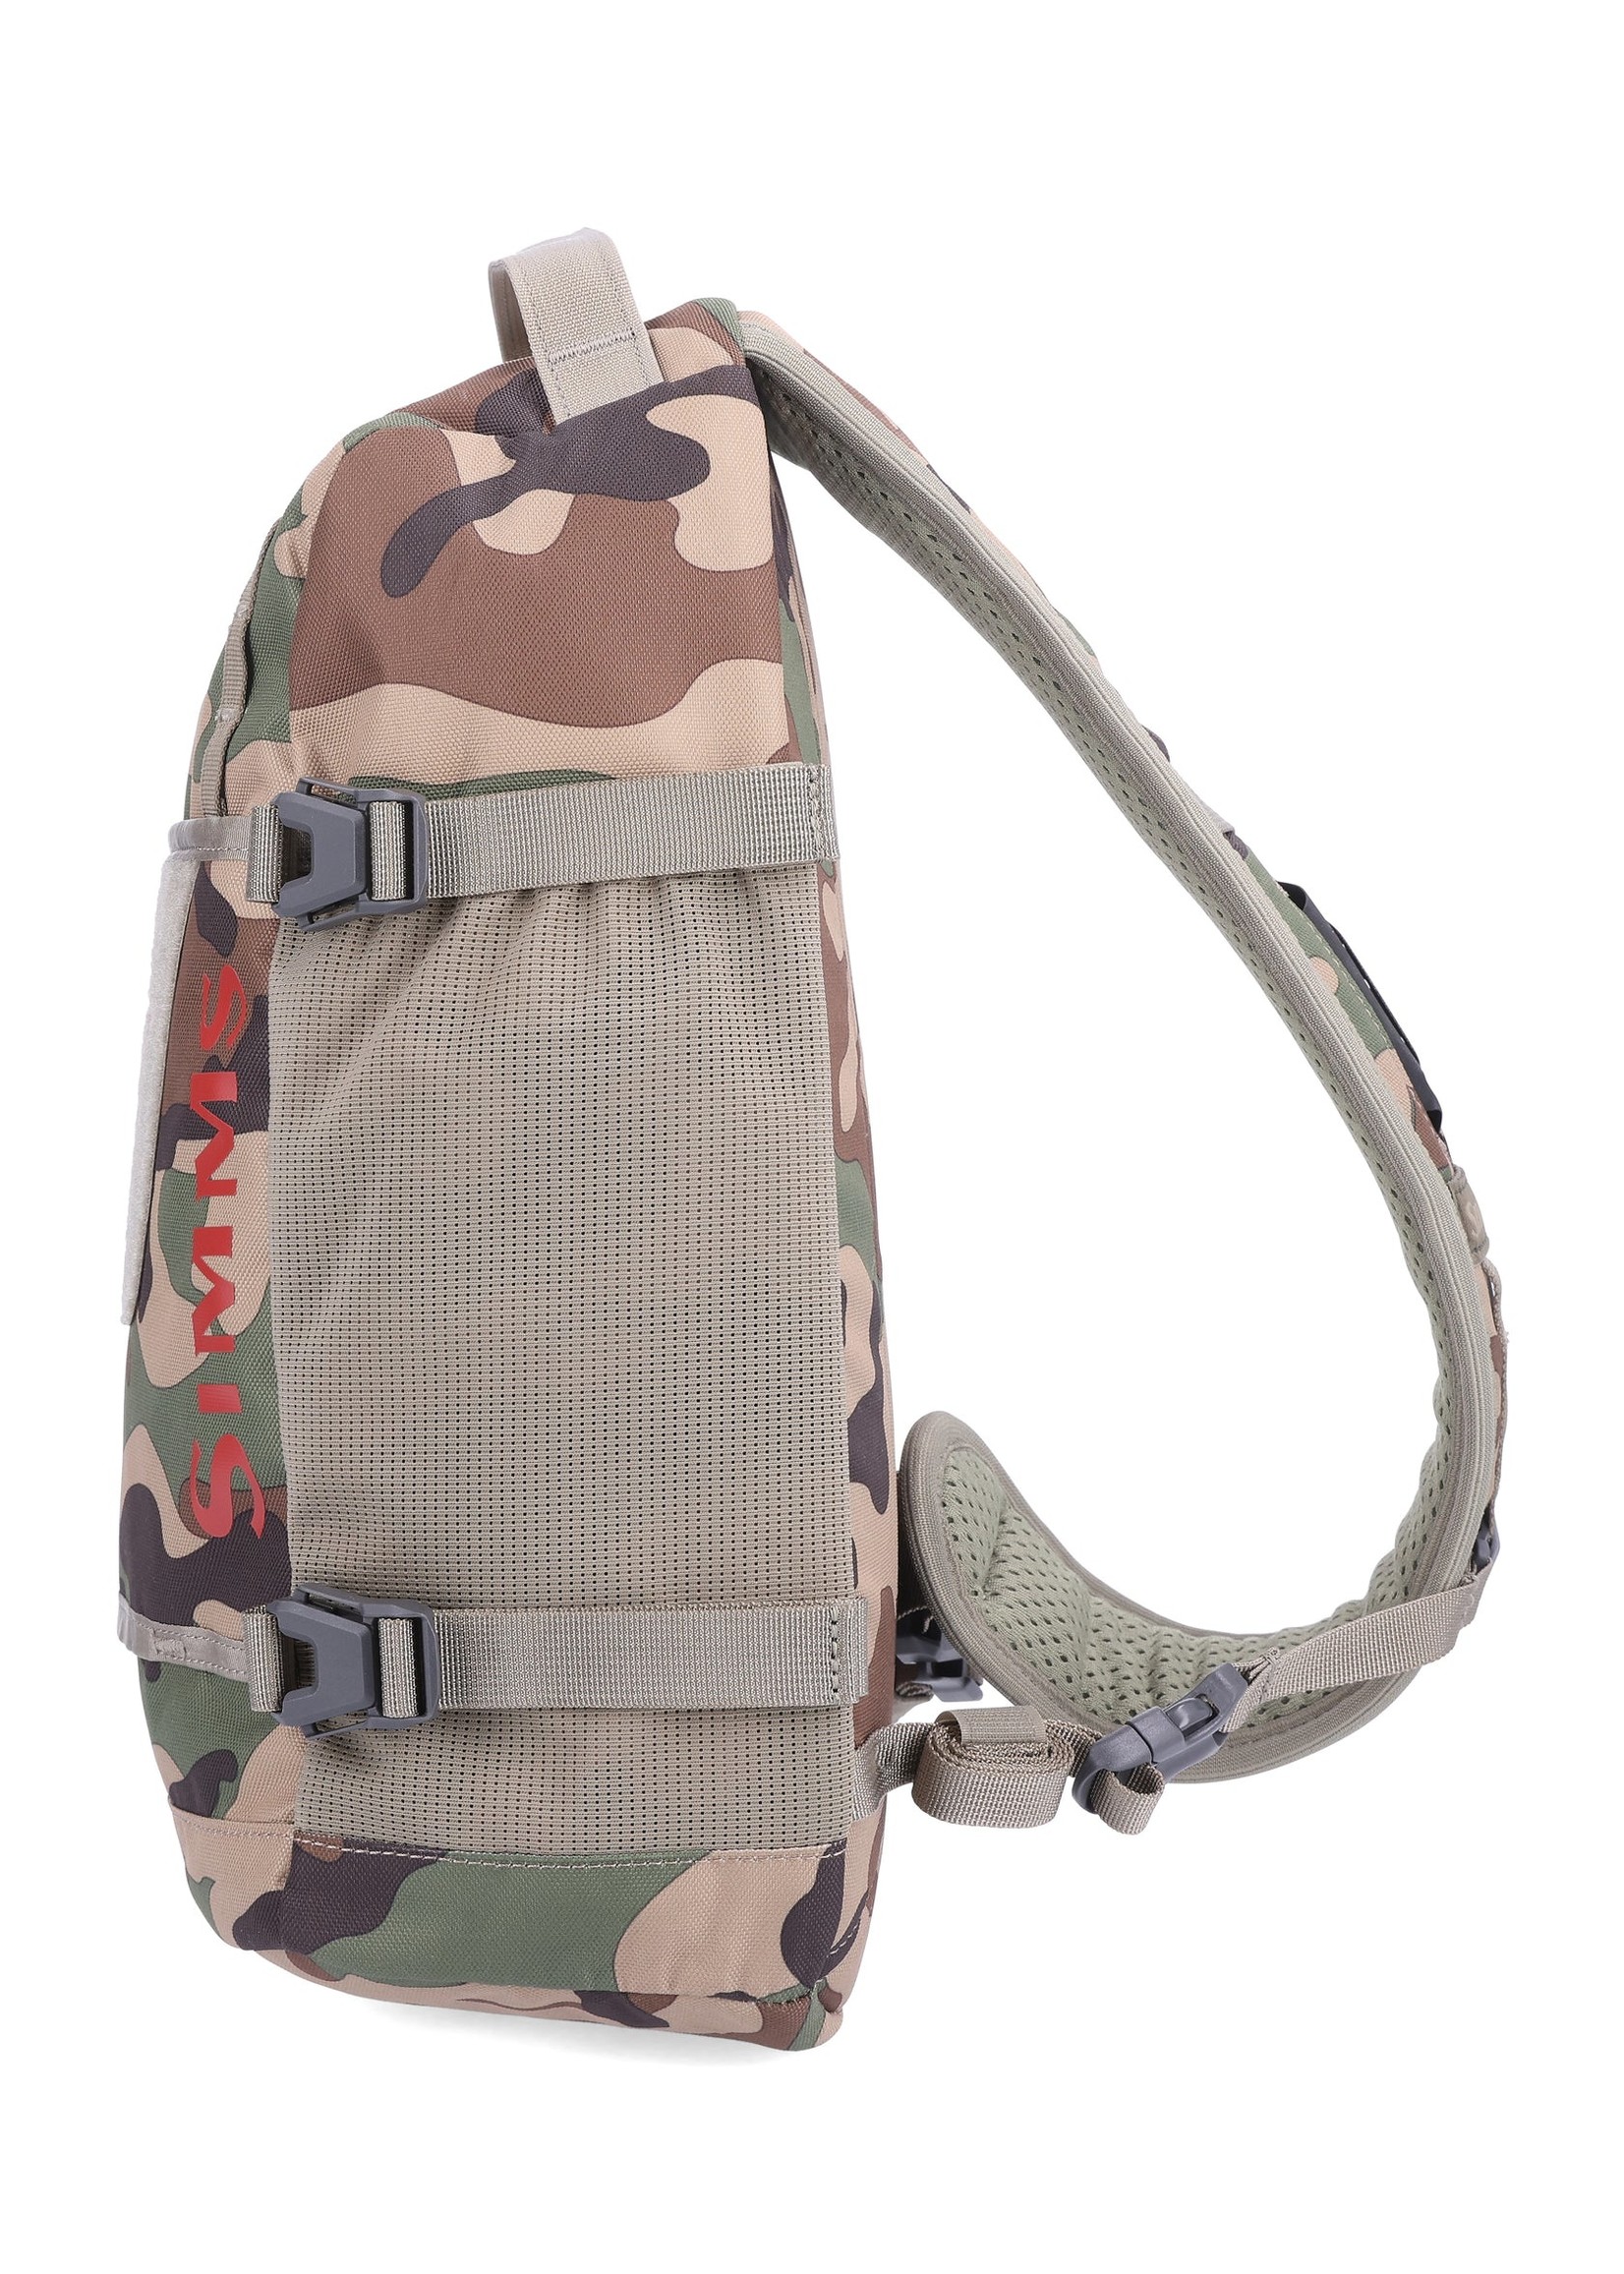 Simms Fishing Tributary Sling Pack - Woodland Camo